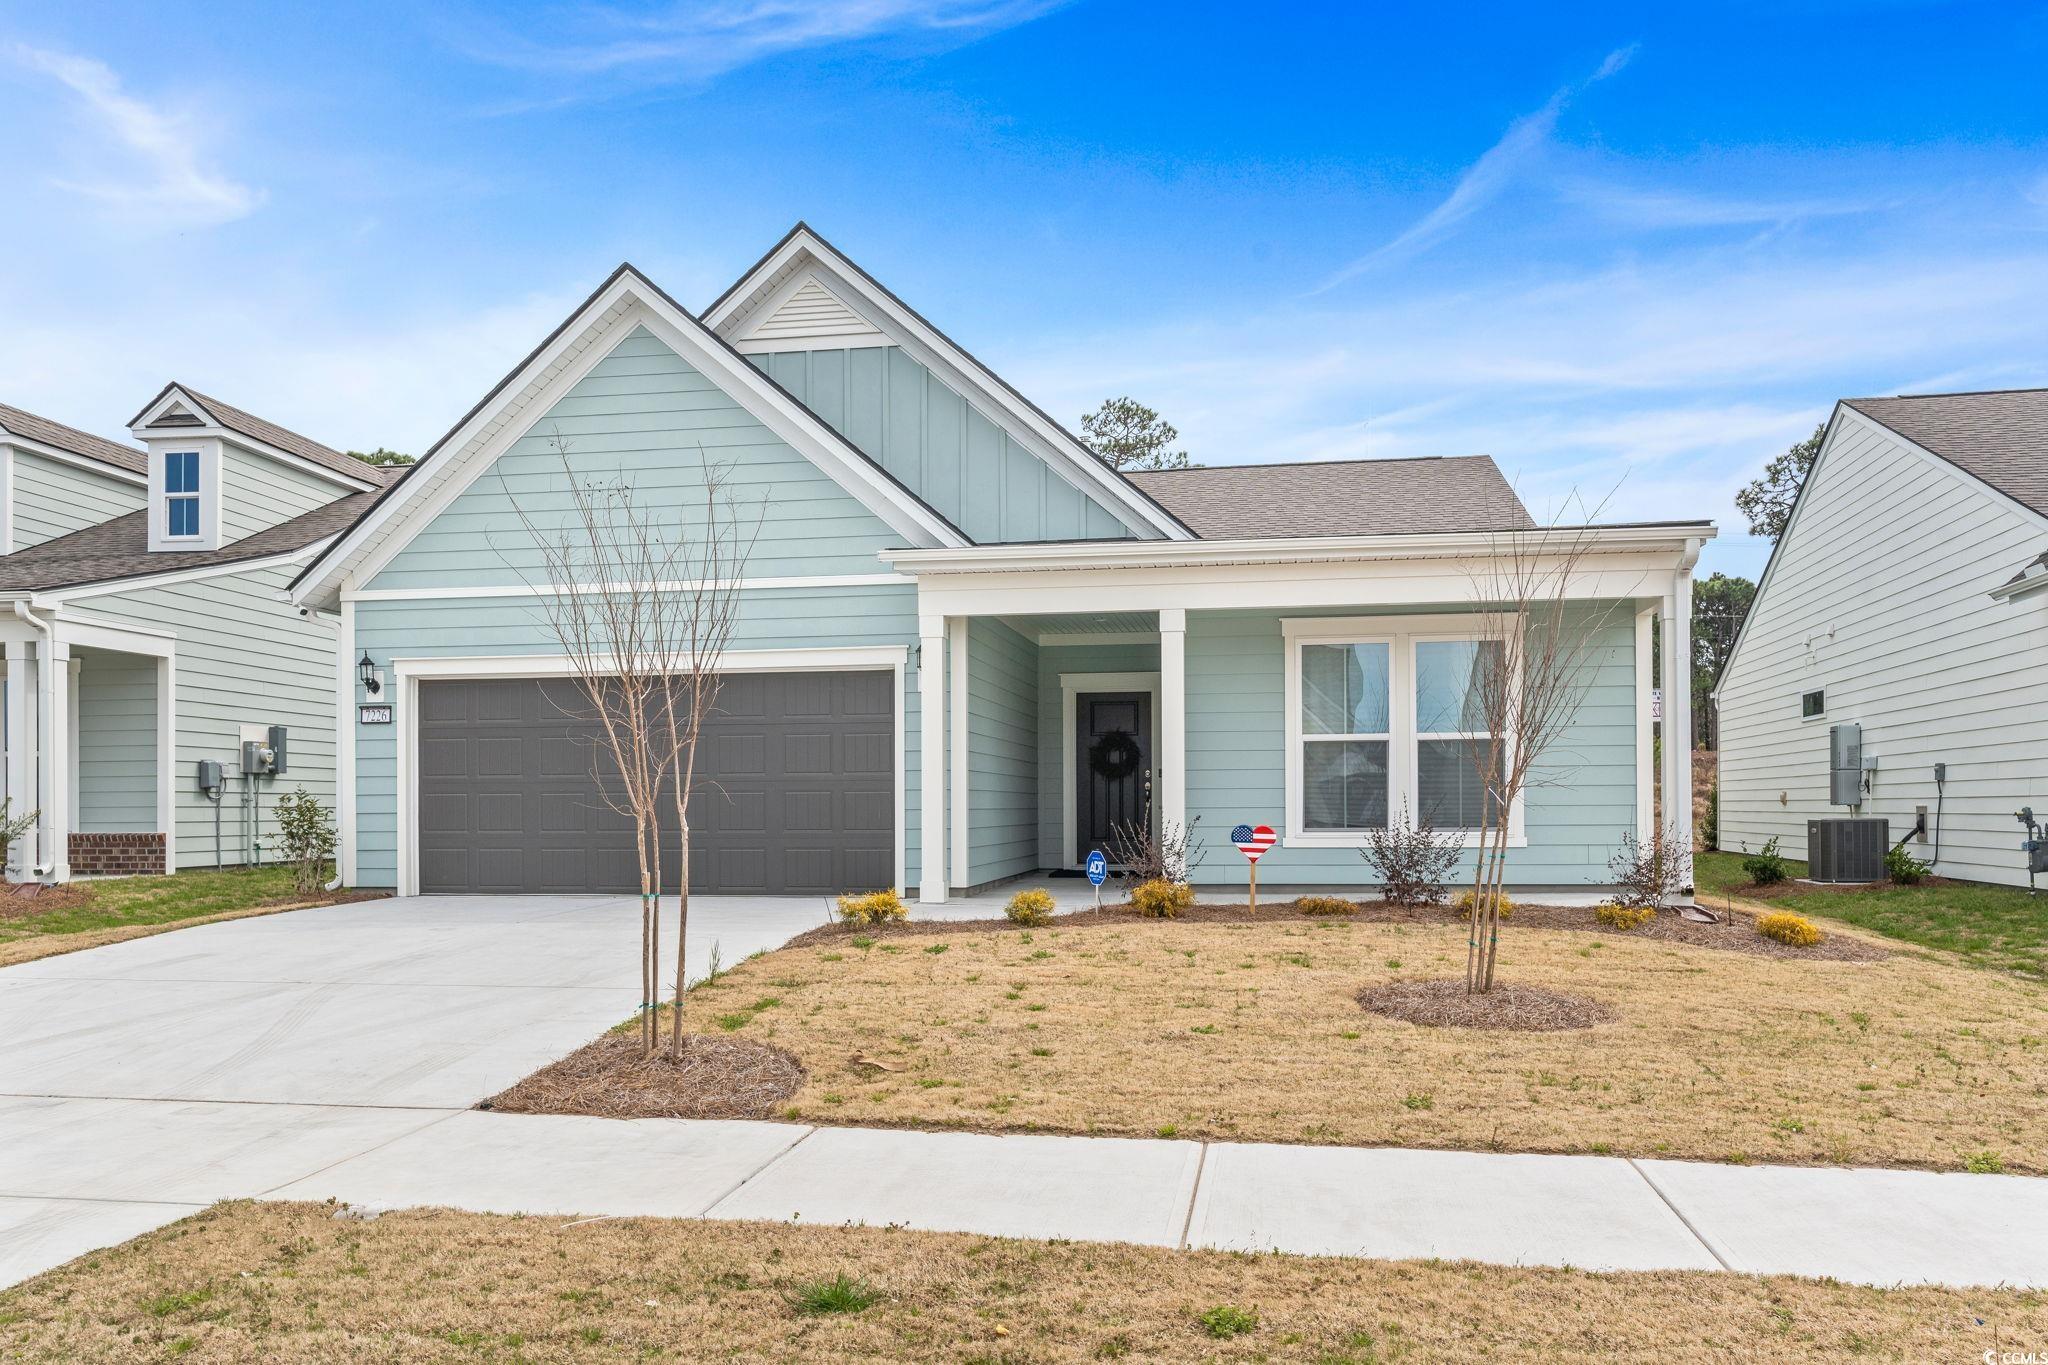 ***open house sun april 21st 1-3 pm*** this del webb neighborhood boasts some of the area's finest amenities on the grand strand.  wait until you see the onsite amenity center featuring an indoor heated pool, outdoor pool, fitness center, tennis courts, pickle ball, bocce ball court, fire pit overlooking the intercoastal waterway, and day dock.  the residents at del webb grande dunes also have access to the grande dunes ocean club.  don't worry about your yard maintenance- it is done for you!  when you're ready hop on your golf cart and you can go directly to the ocean club or just roam the neighborhood.  this is home has only been used a couple of times by the owners and has many upgrades that you will want to see. the primary bedroom is your private getaway with tray ceilings and a spacious walk-in closet. the primary bathroom boasts a massive walk-in shower with a rainfall shower head and double vanities.  if you love to cook, the gourmet kitchen showcases upgraded cabinets with state-of-the-art appliances, beautiful quartz countertops and a large walk-in pantry.  don't forget to take a look at the upgraded slider leading from the dining area to the screened in back patio.  the garage is massive, with an extended area that could be used for your golf cart or for a workshop.  what are you waiting for live the life of leisure and enjoy life to the fullest at the del webb- grande dunes community!  home has had security system installed by adt and will stay with the home.